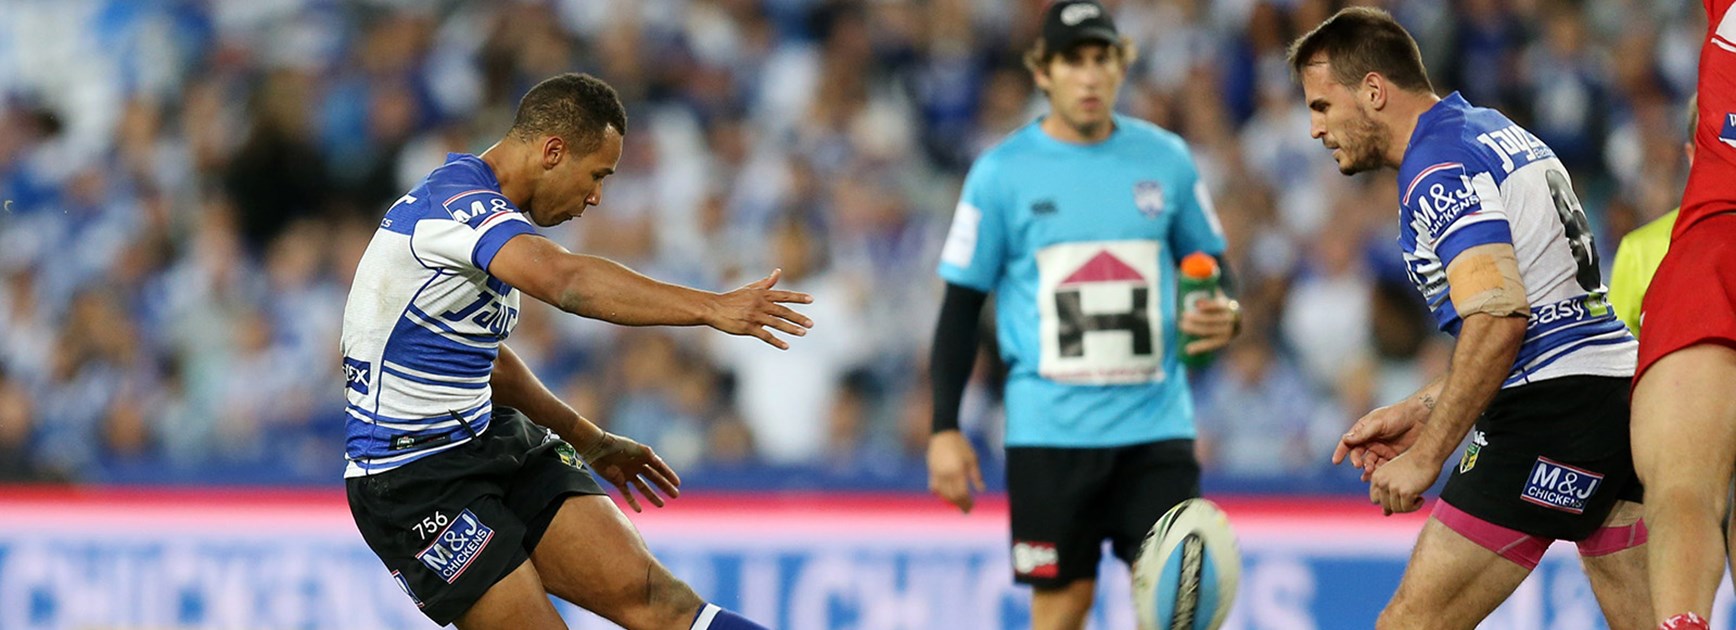 Moses Mbye kicked the match-sealing field goal for the Bulldogs against the Dragons in Round 13.